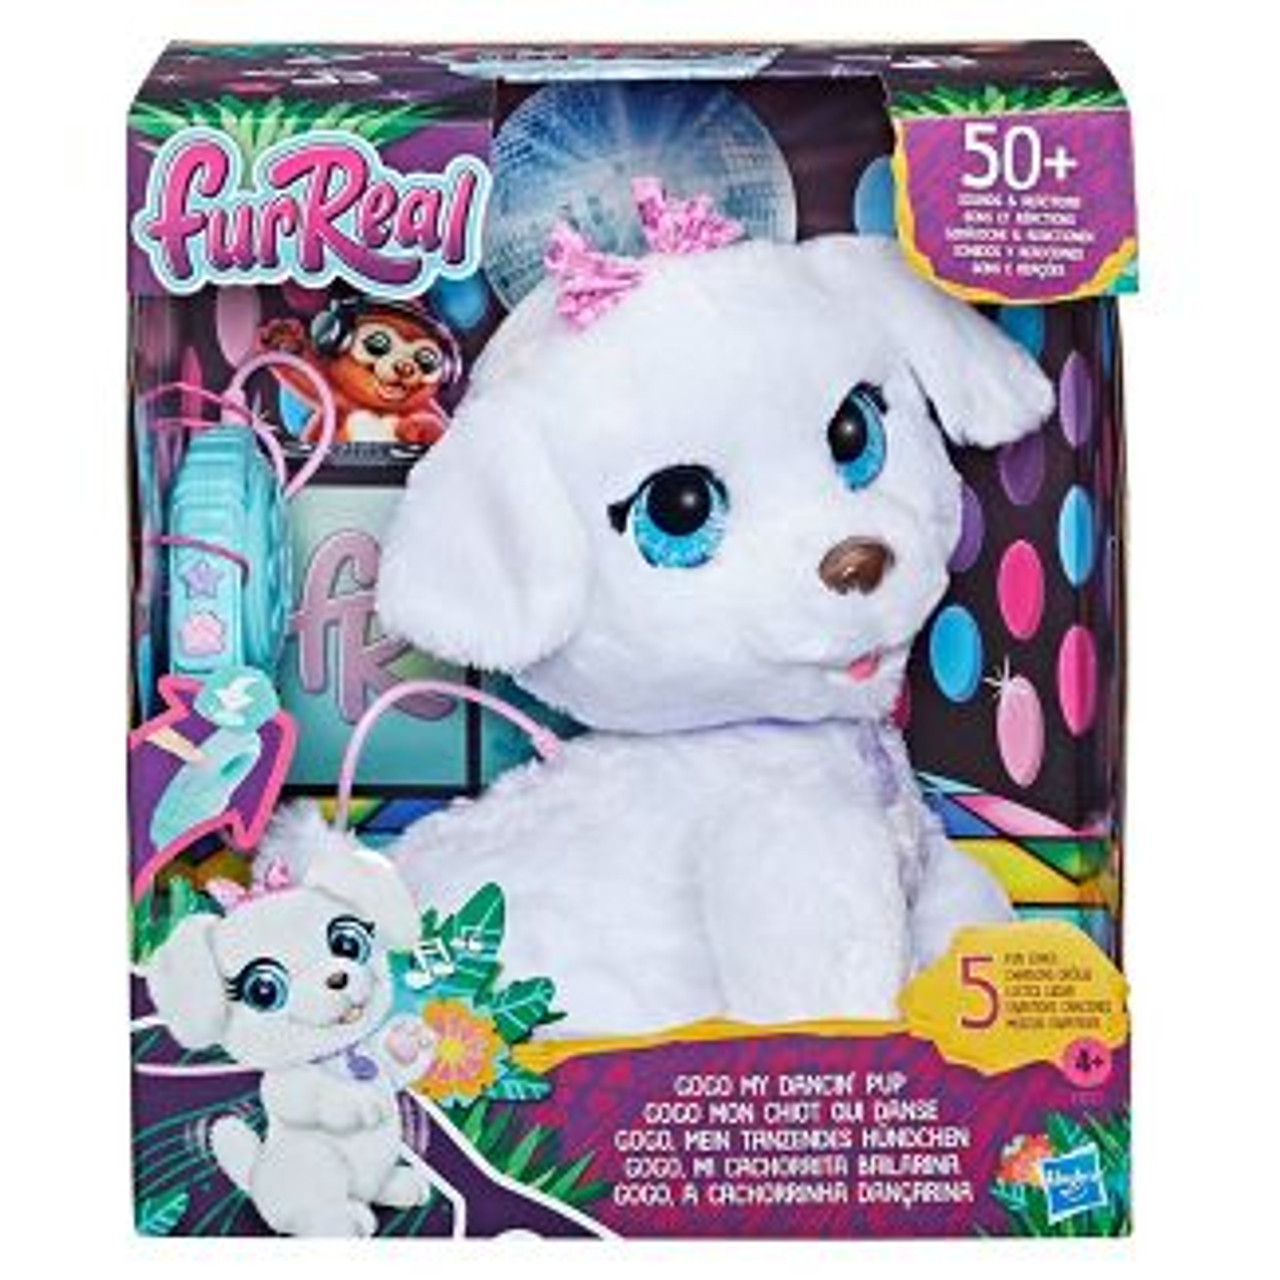 FurReal Friends Glamalots Puppy Toy